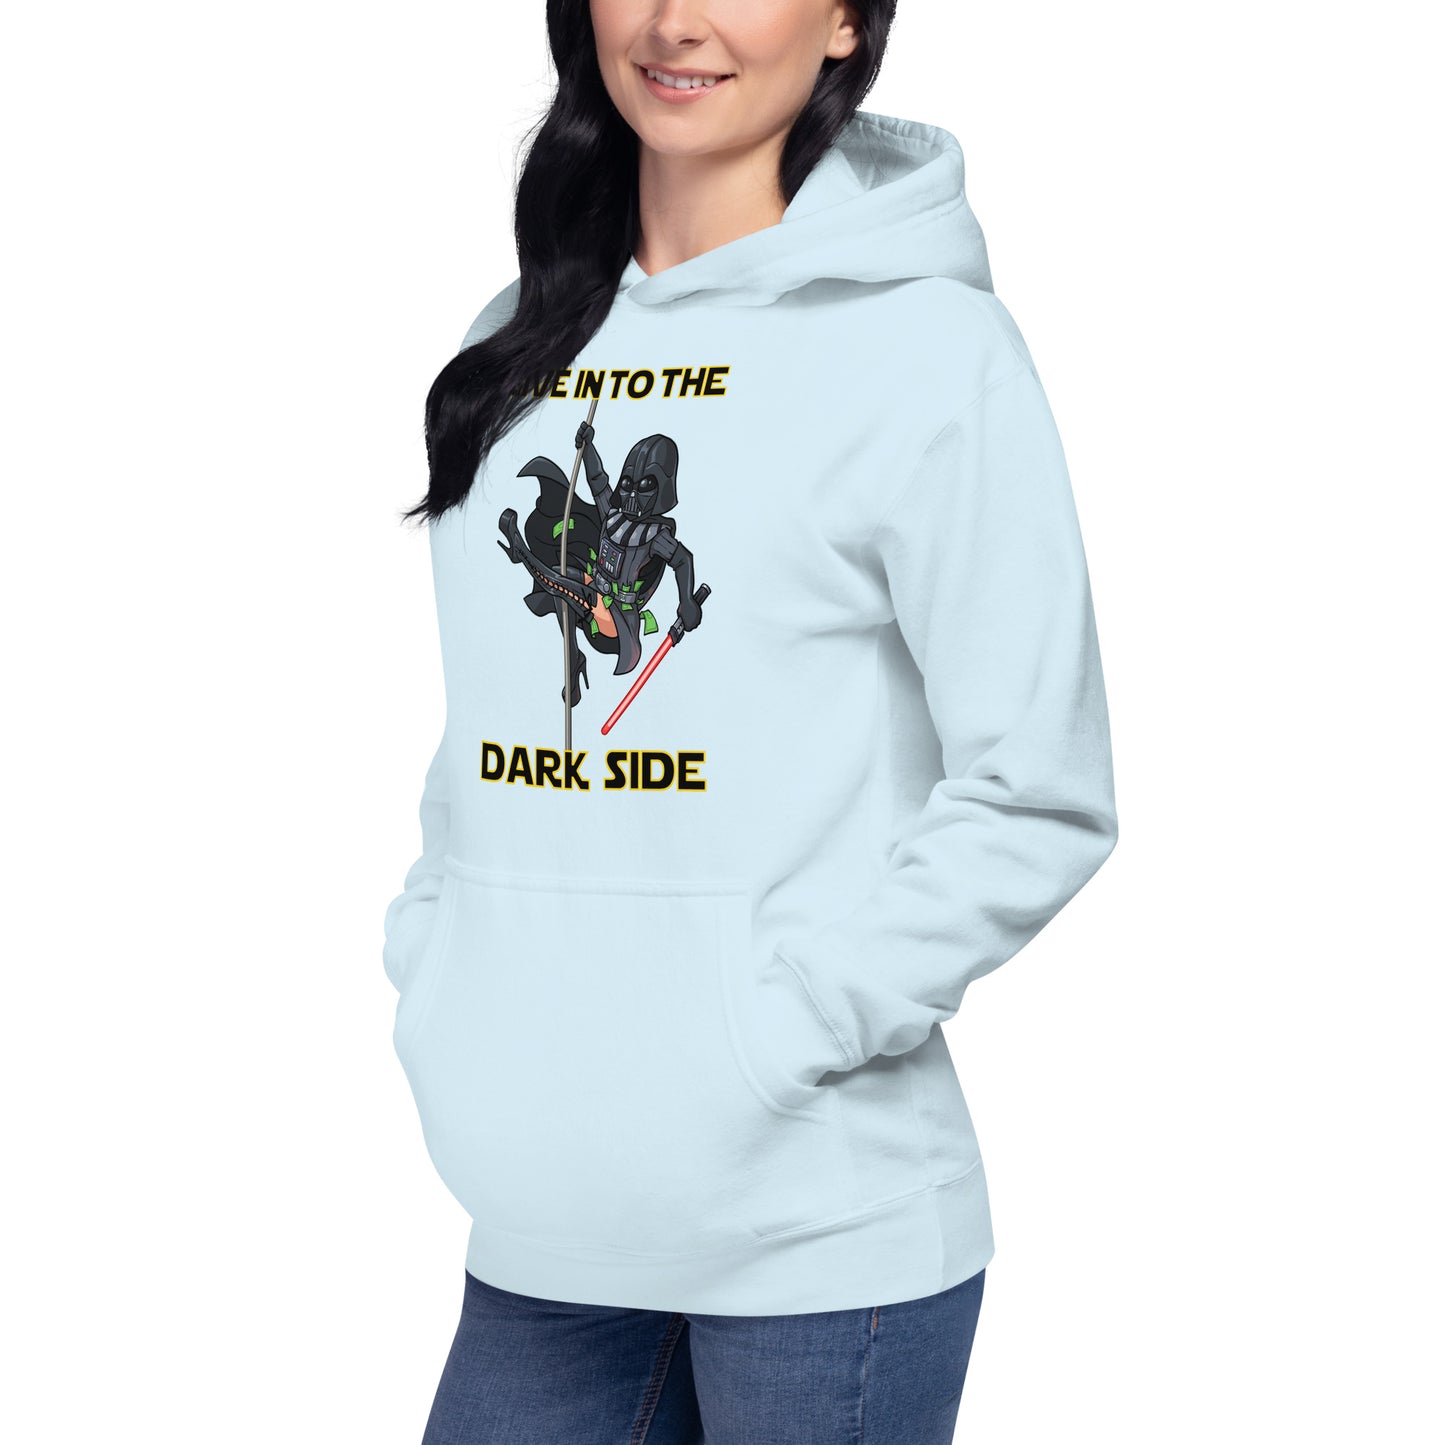 Give In To The Dark Side - Unisex Hoodie